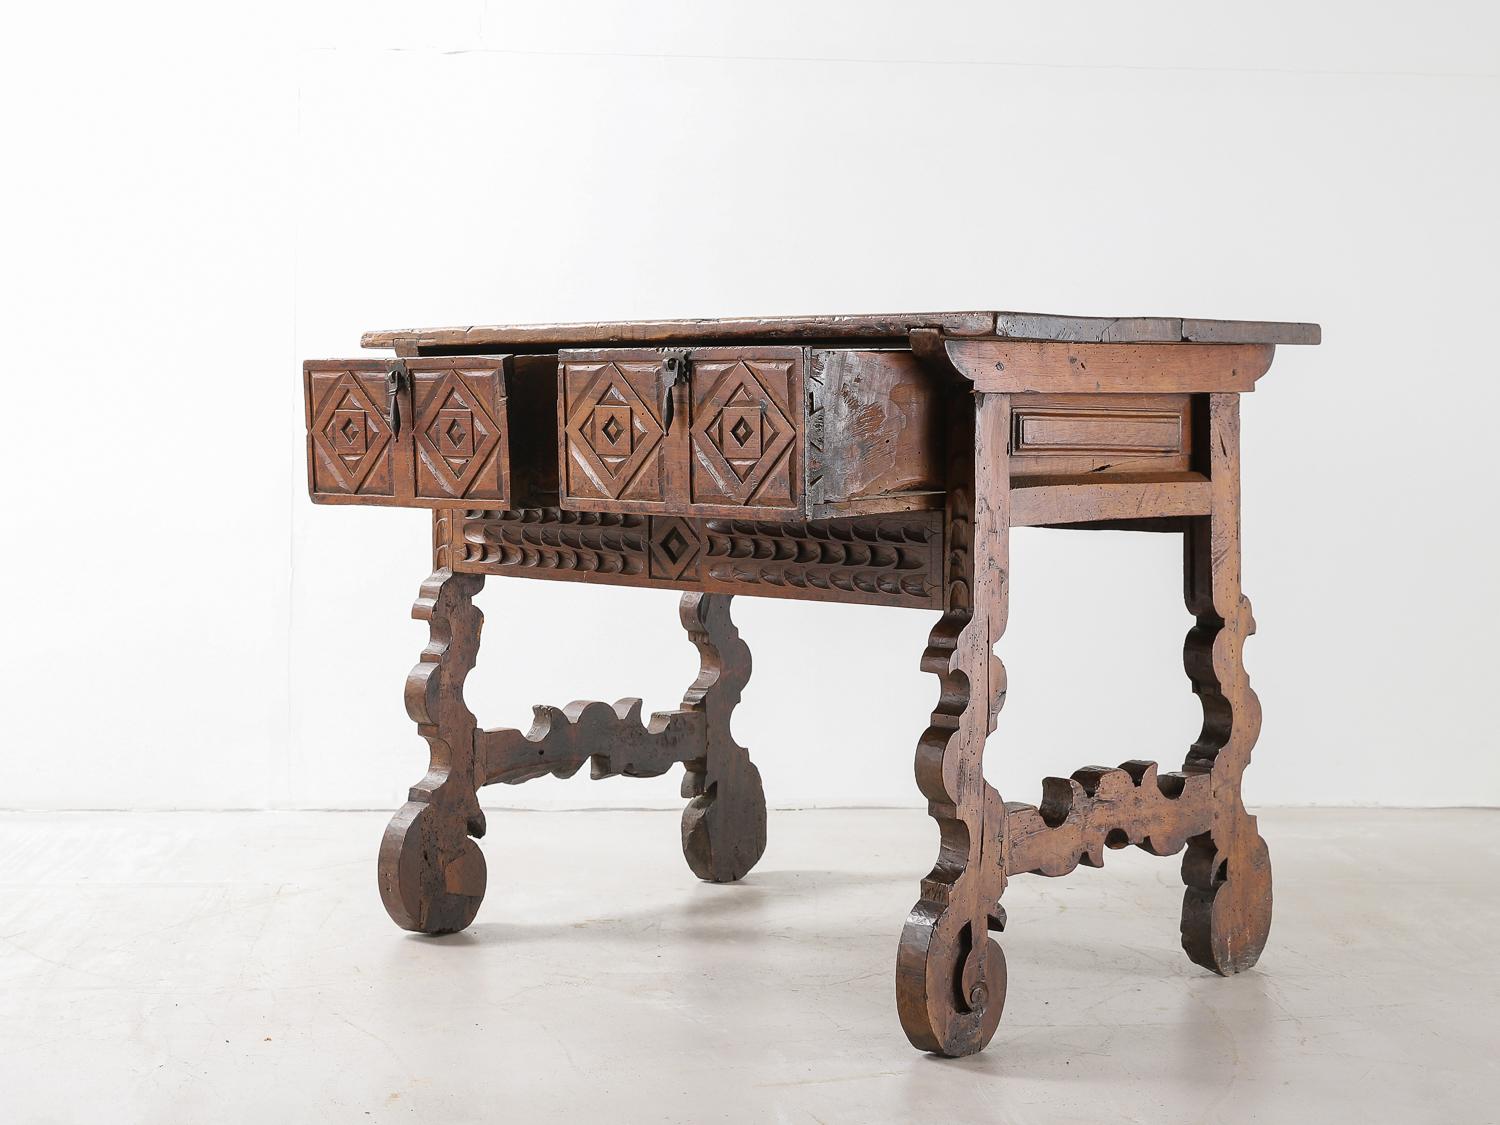 Spanish 18th Century Carved Walnut Table with Original Iron Pulls and Lyre Legs In Good Condition For Sale In London, Charterhouse Square